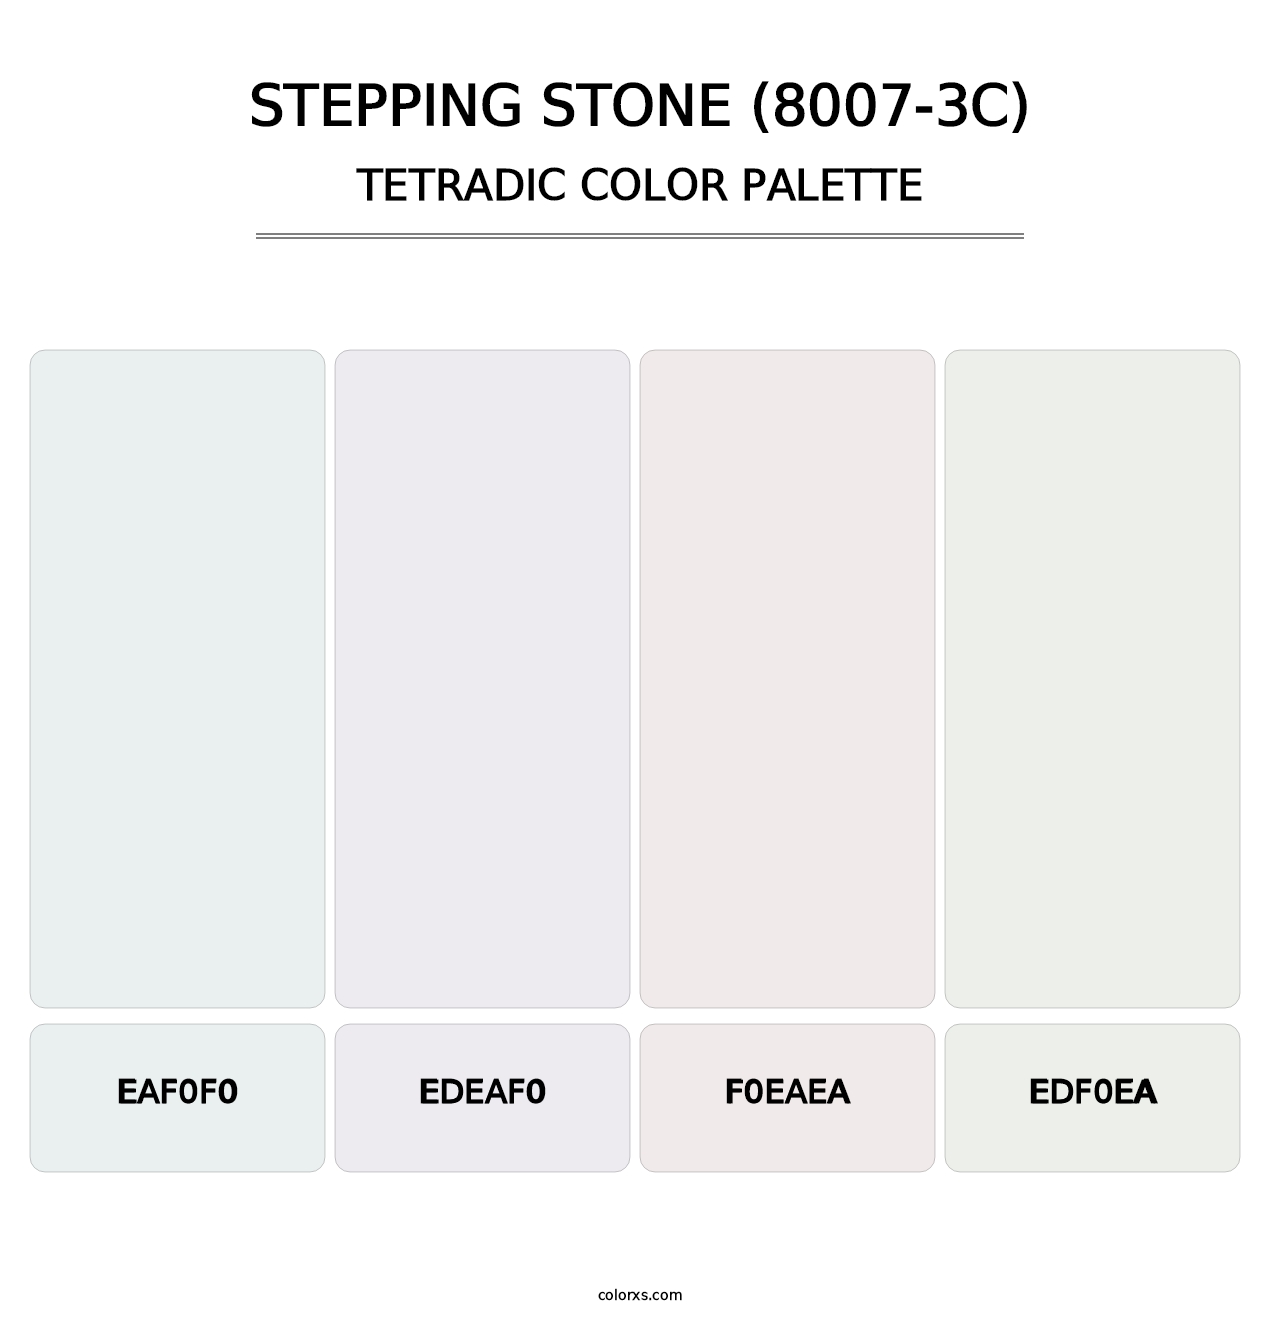 Stepping Stone (8007-3C) - Tetradic Color Palette